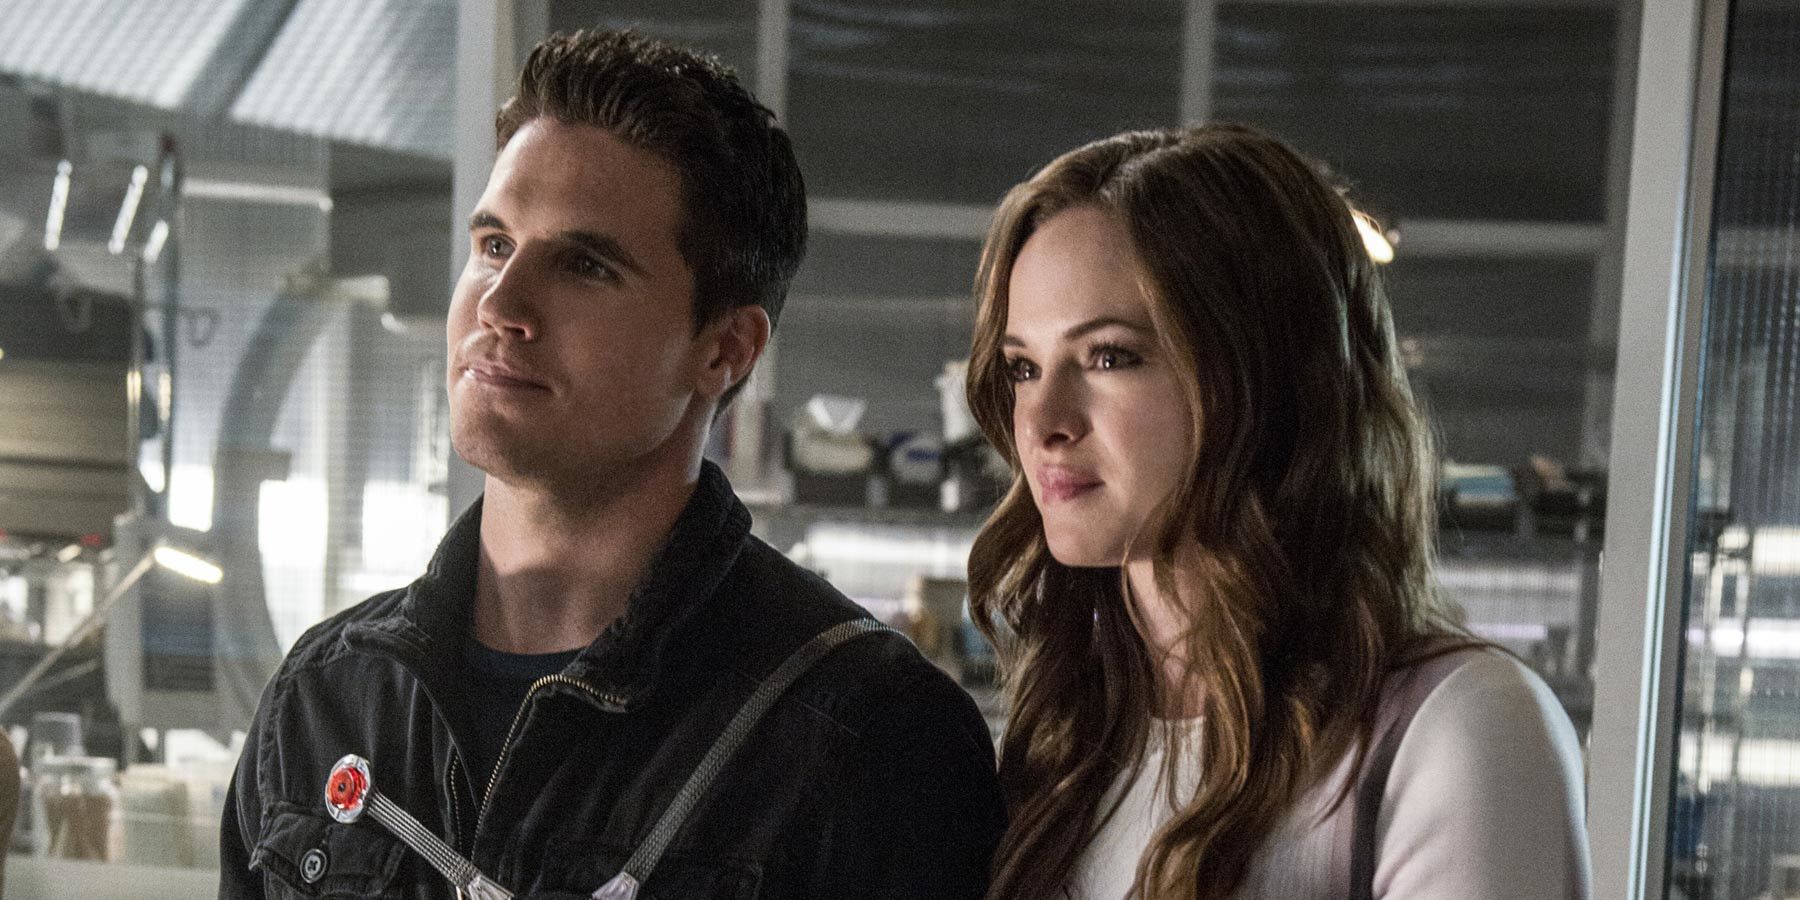 Ronnie Raymond (Robbie Amell) and Caitlin Snow (Danielle Panabaker) in Arroverse's The Flash